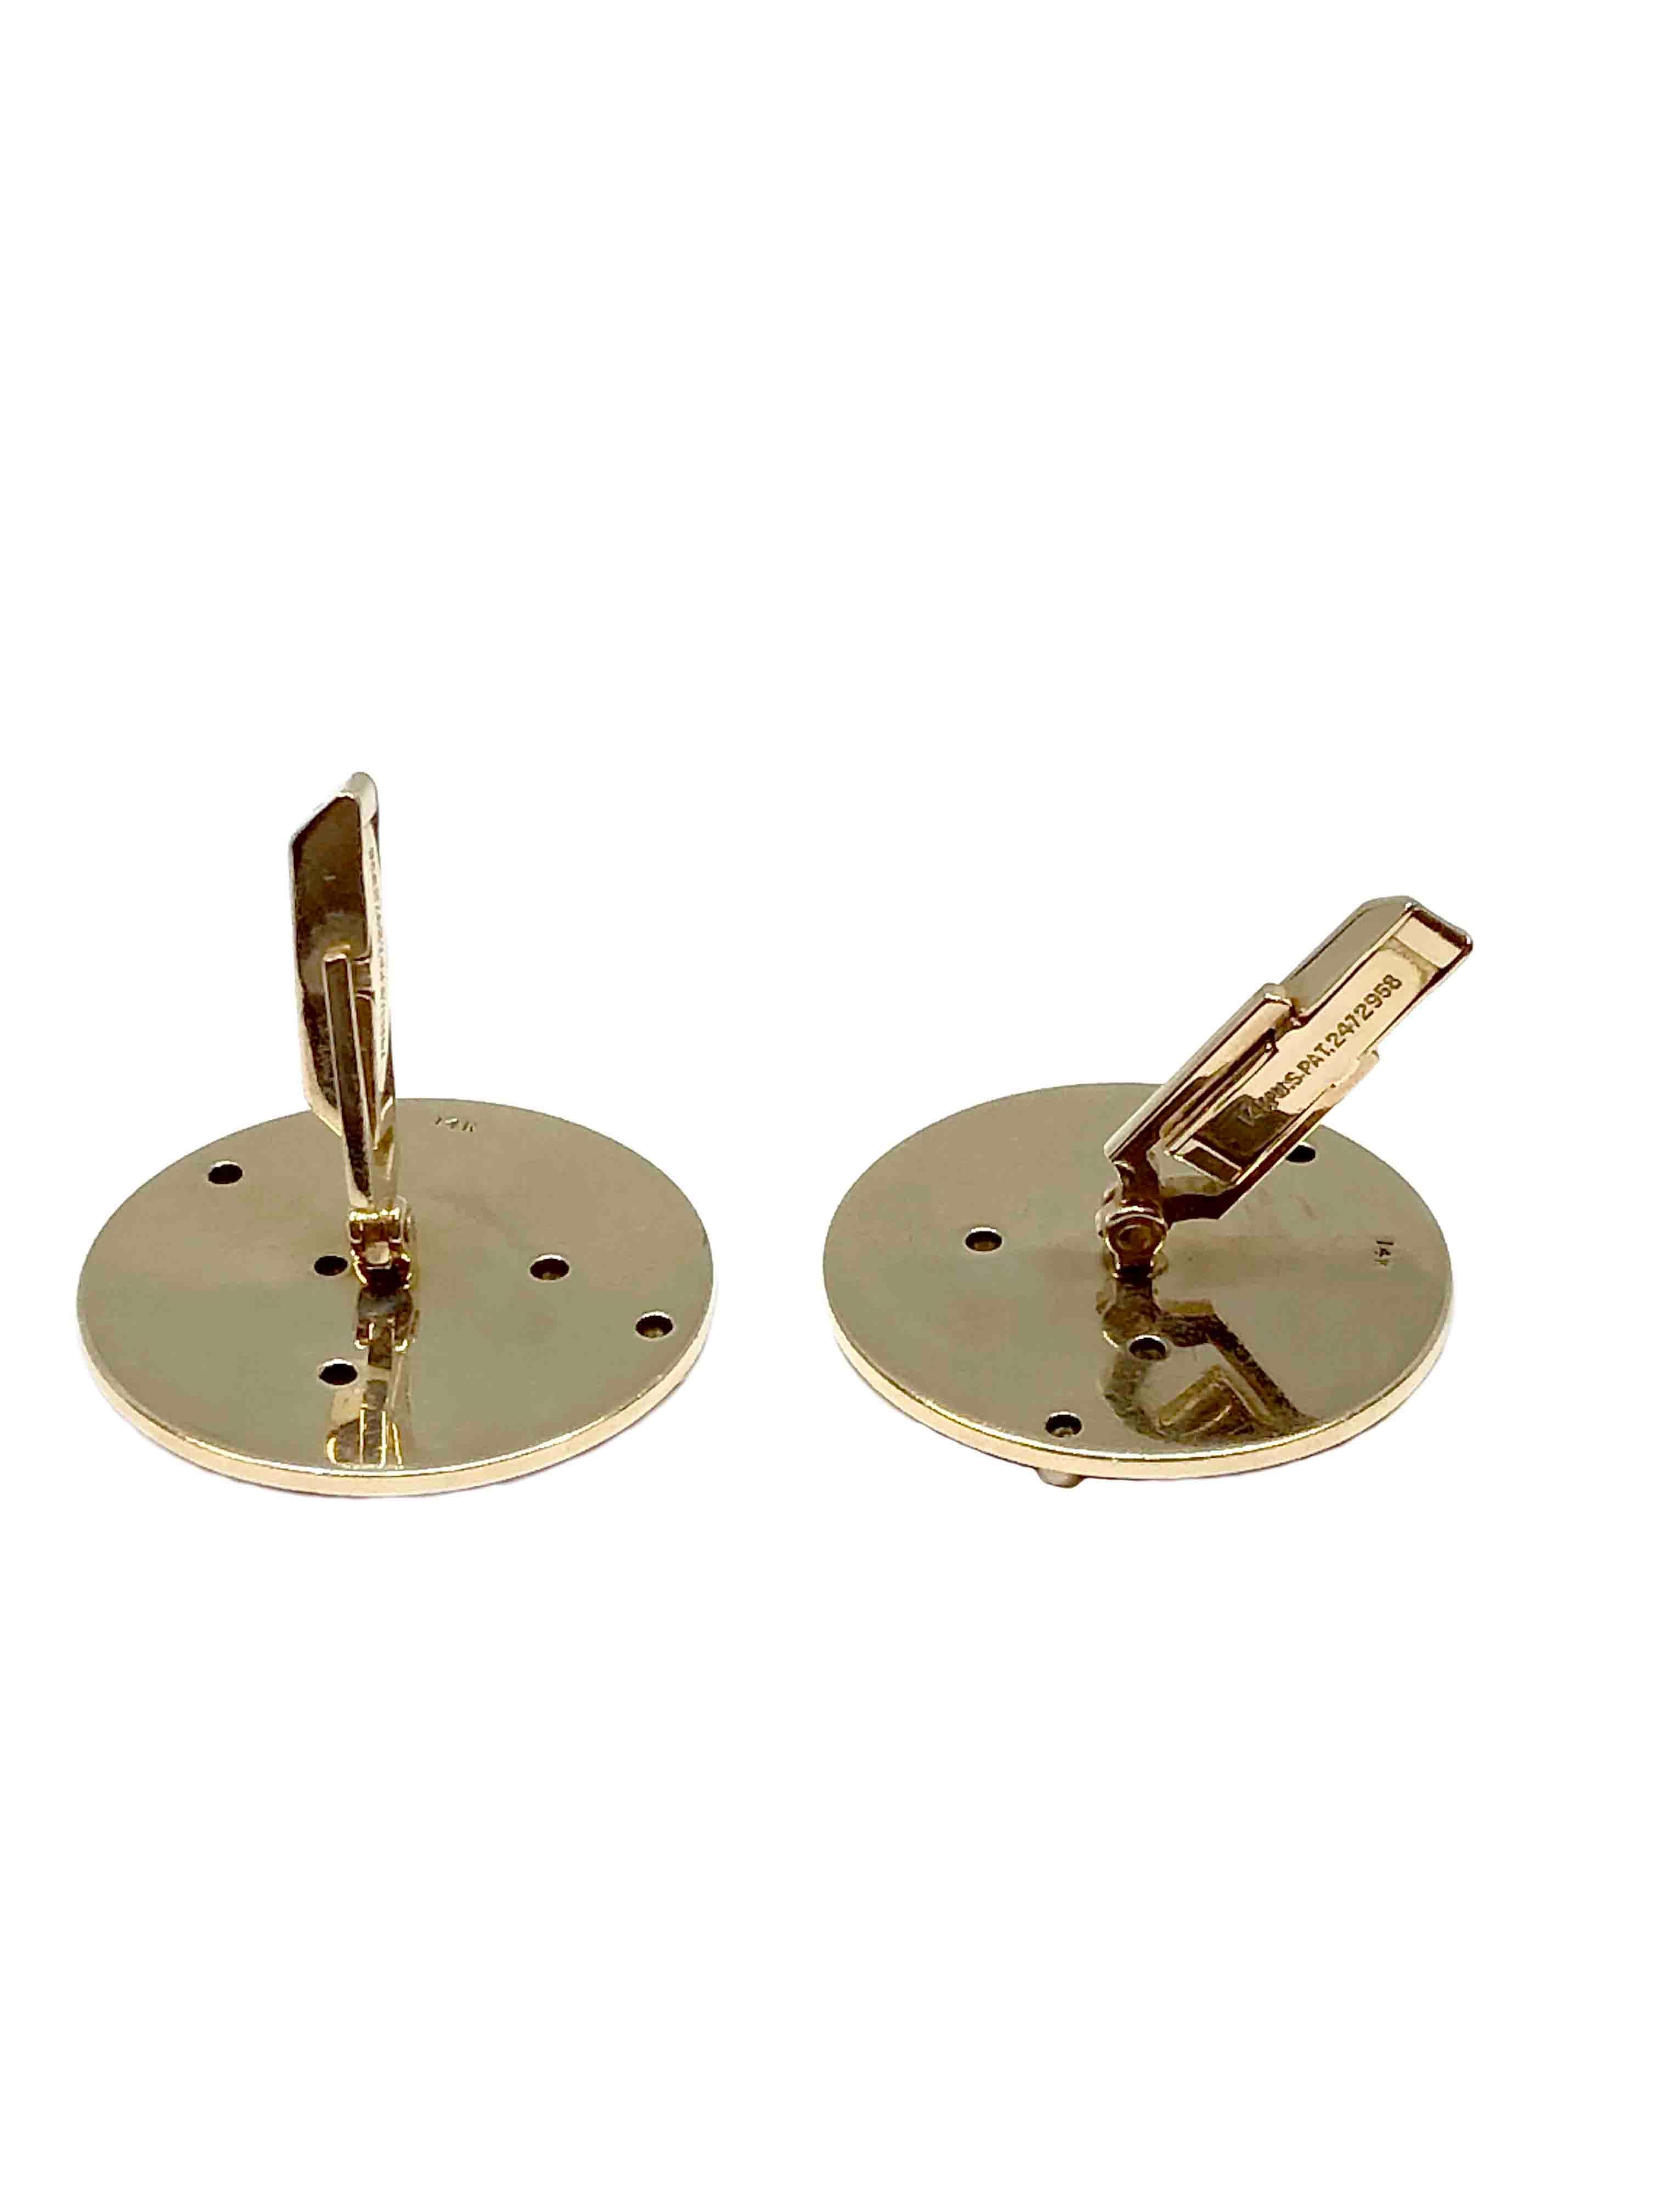 Circa 1960s 14K Yellow Gold Cufflinks owned and worn by Jerry Lewis,  measuring 1 1/4 inches in diameter the cufflinks have a map of the European continent with cities marked with a Diamond, the cufflinks were custom made to commemorate a 1960s